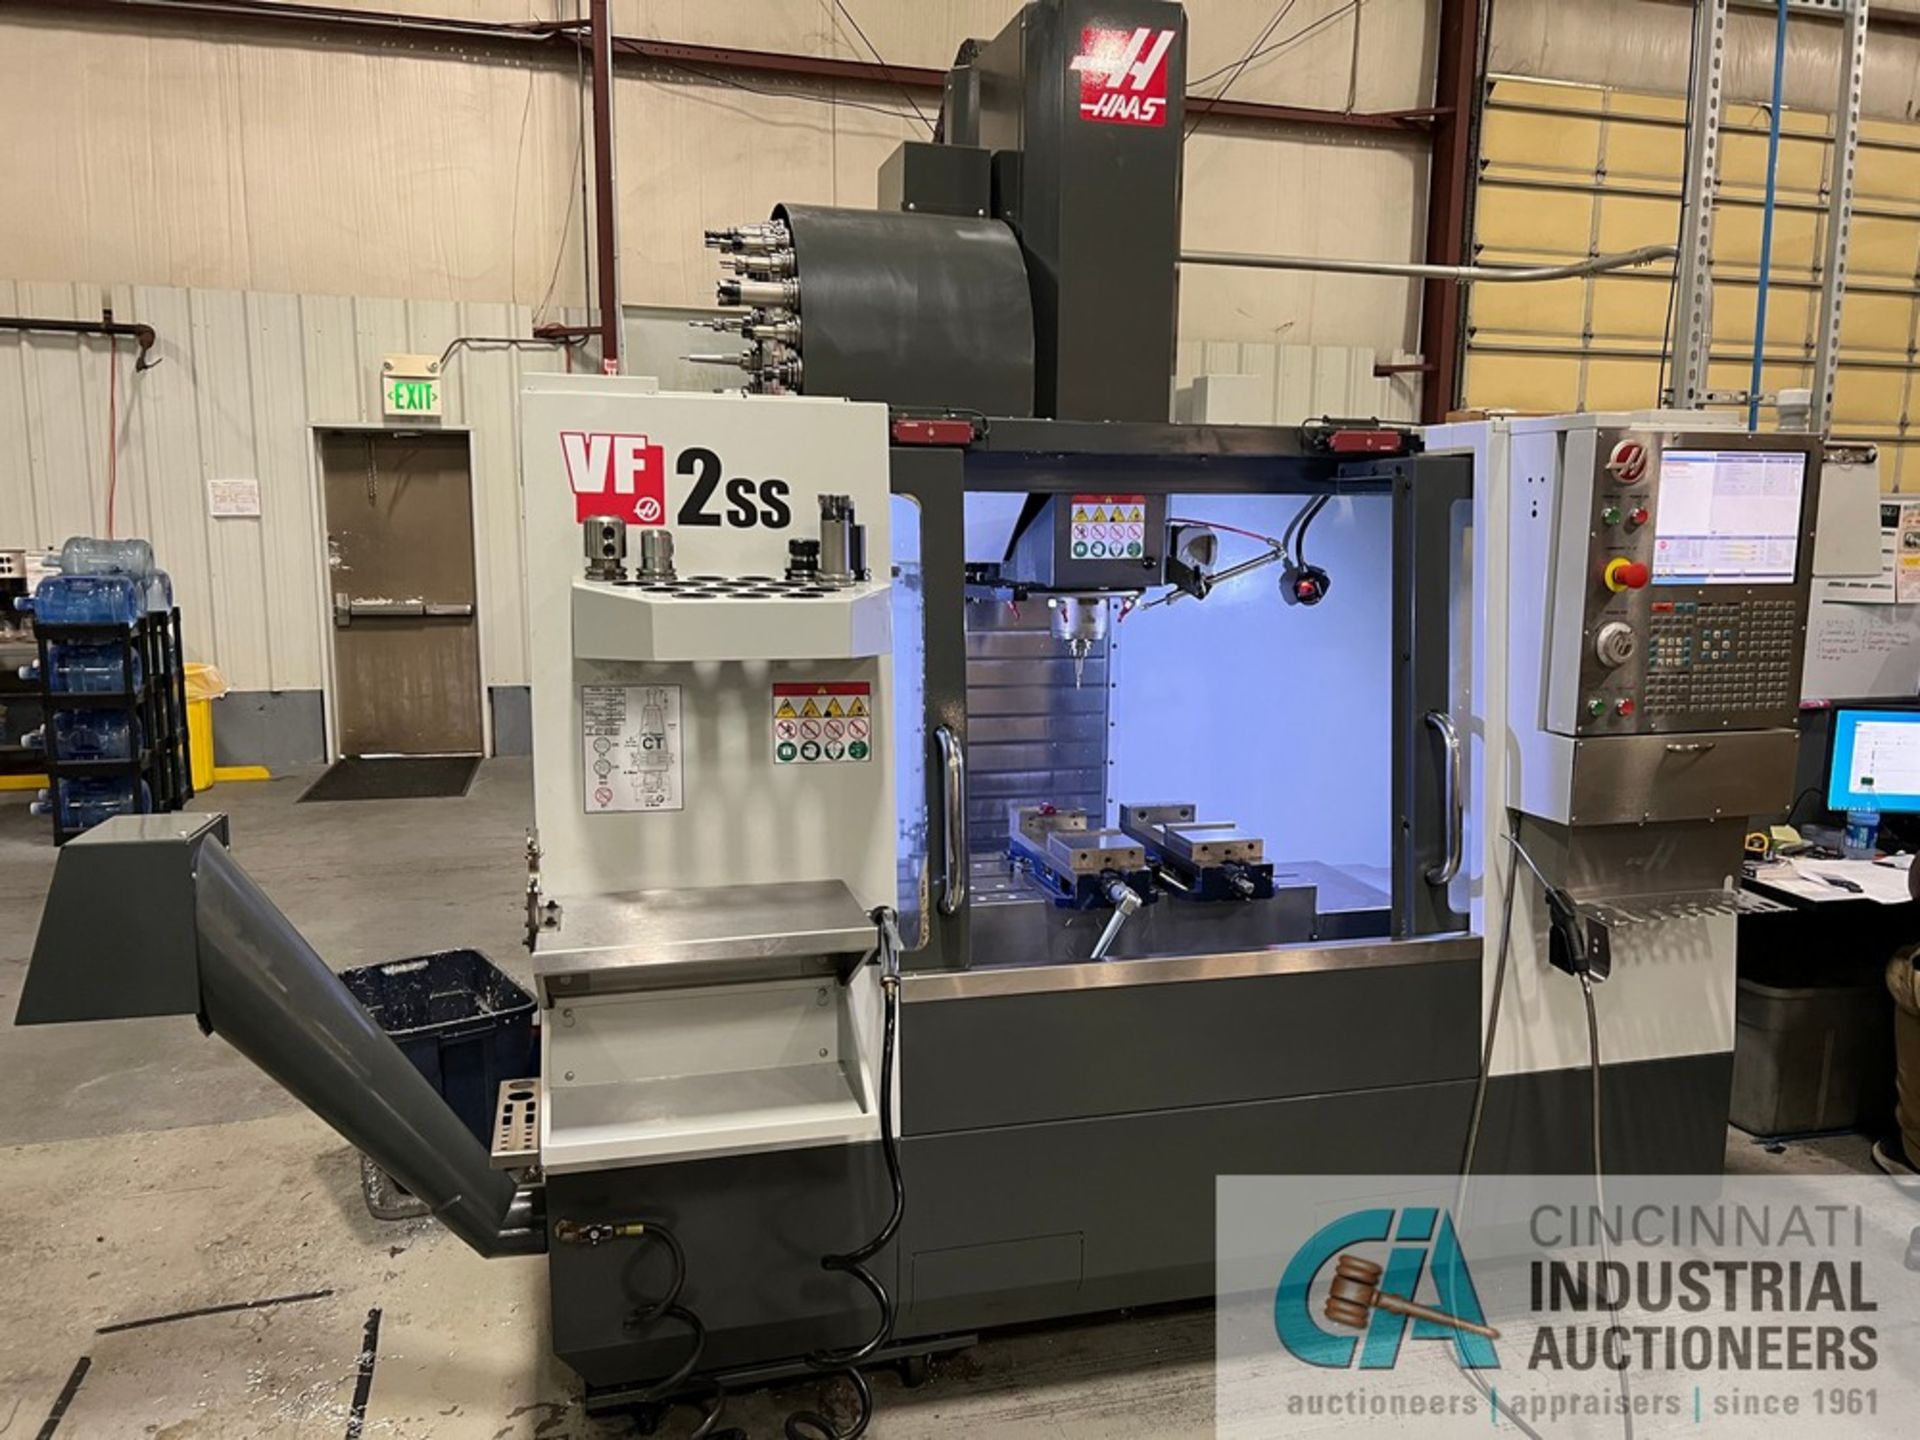 Haas Model VF-2SS CNC Vertical Machining Center (2016) 4,906 Cutting Hours Showing - Image 4 of 18